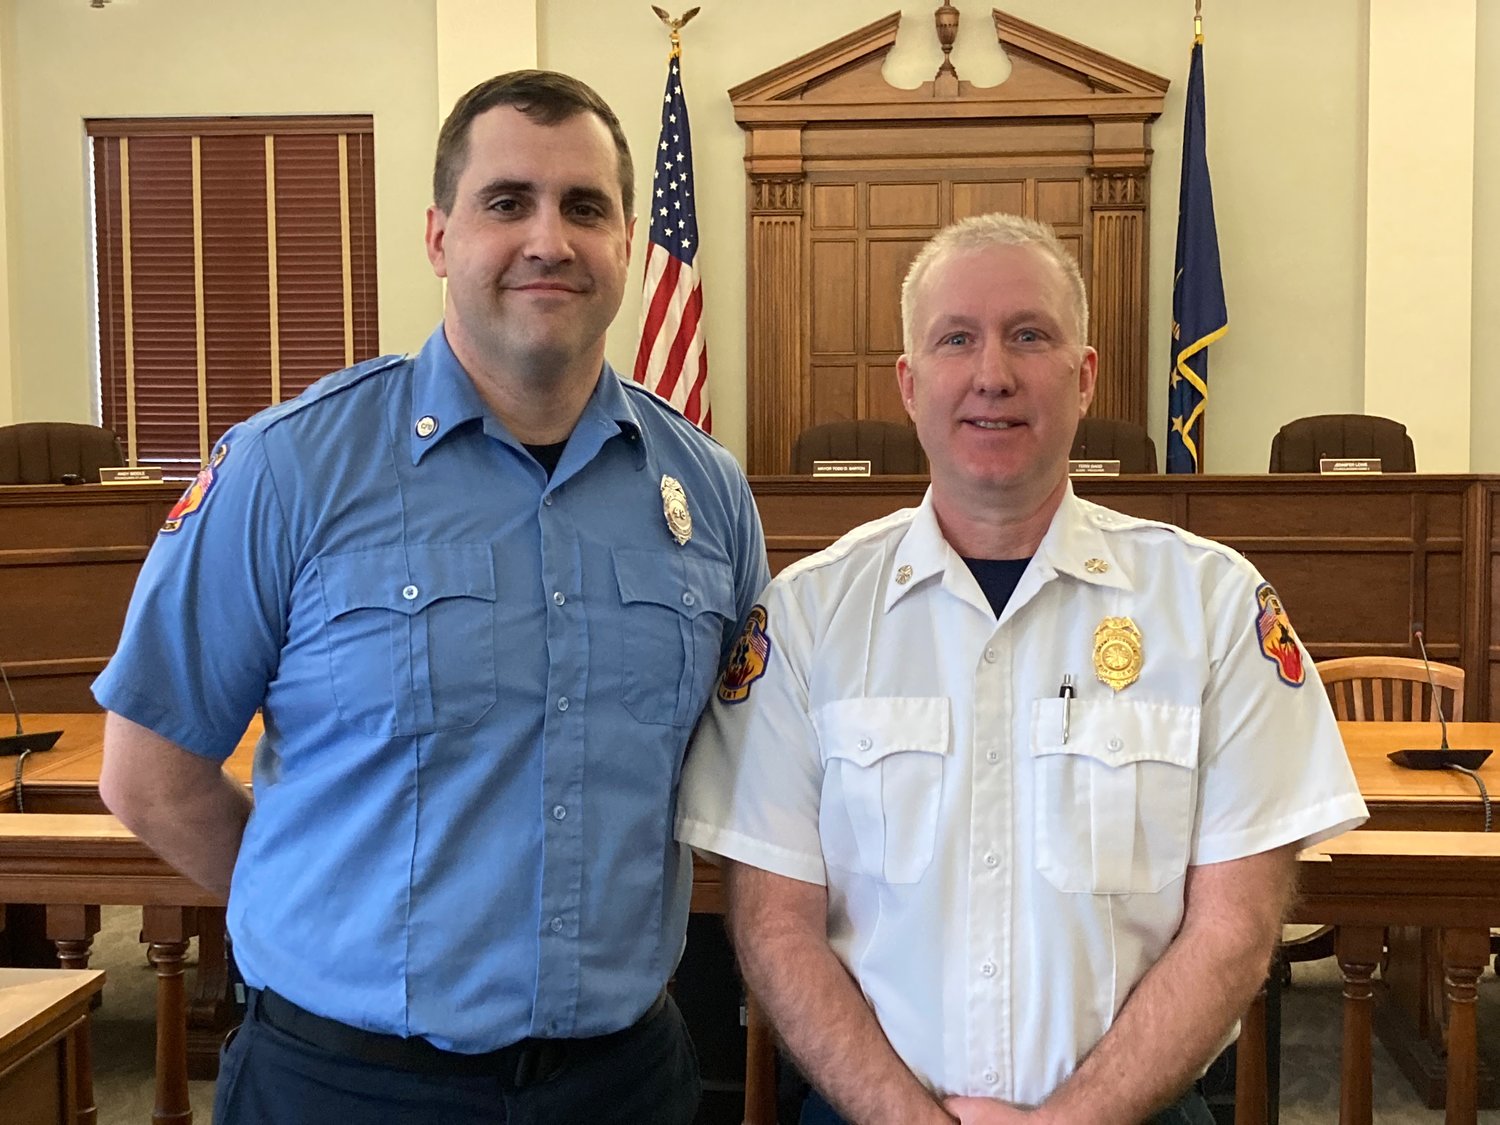 Gary Villines, left, was sworn in as the newest member of the Crawfordsville Fire Department. He is pictured with Chief Scott Busenbark.